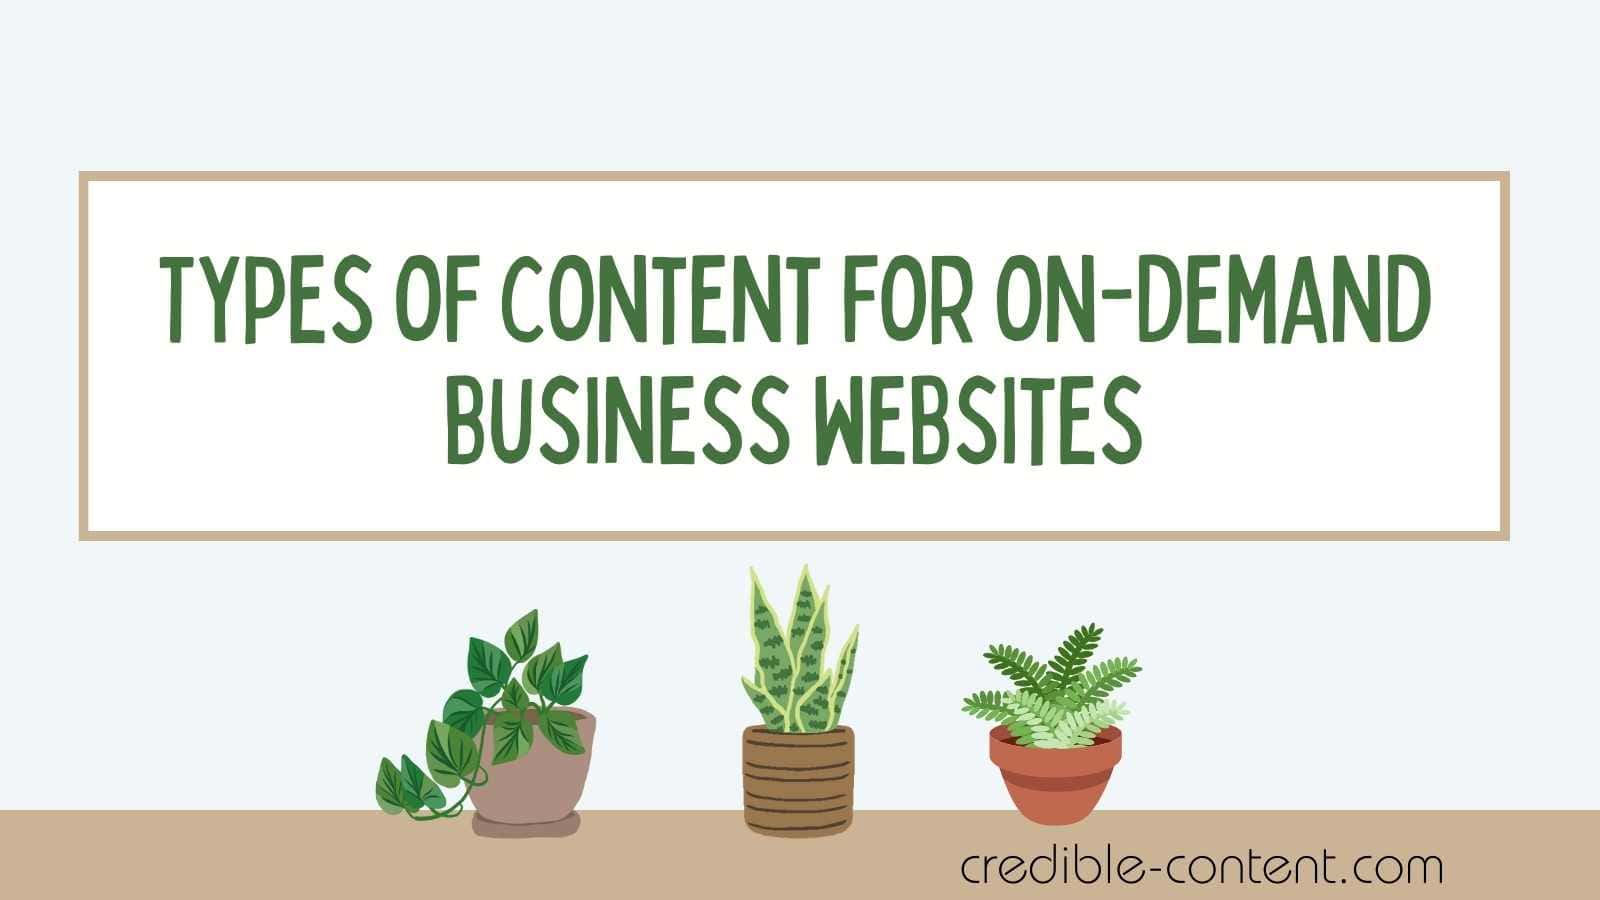 Types of content for on-demand business websites